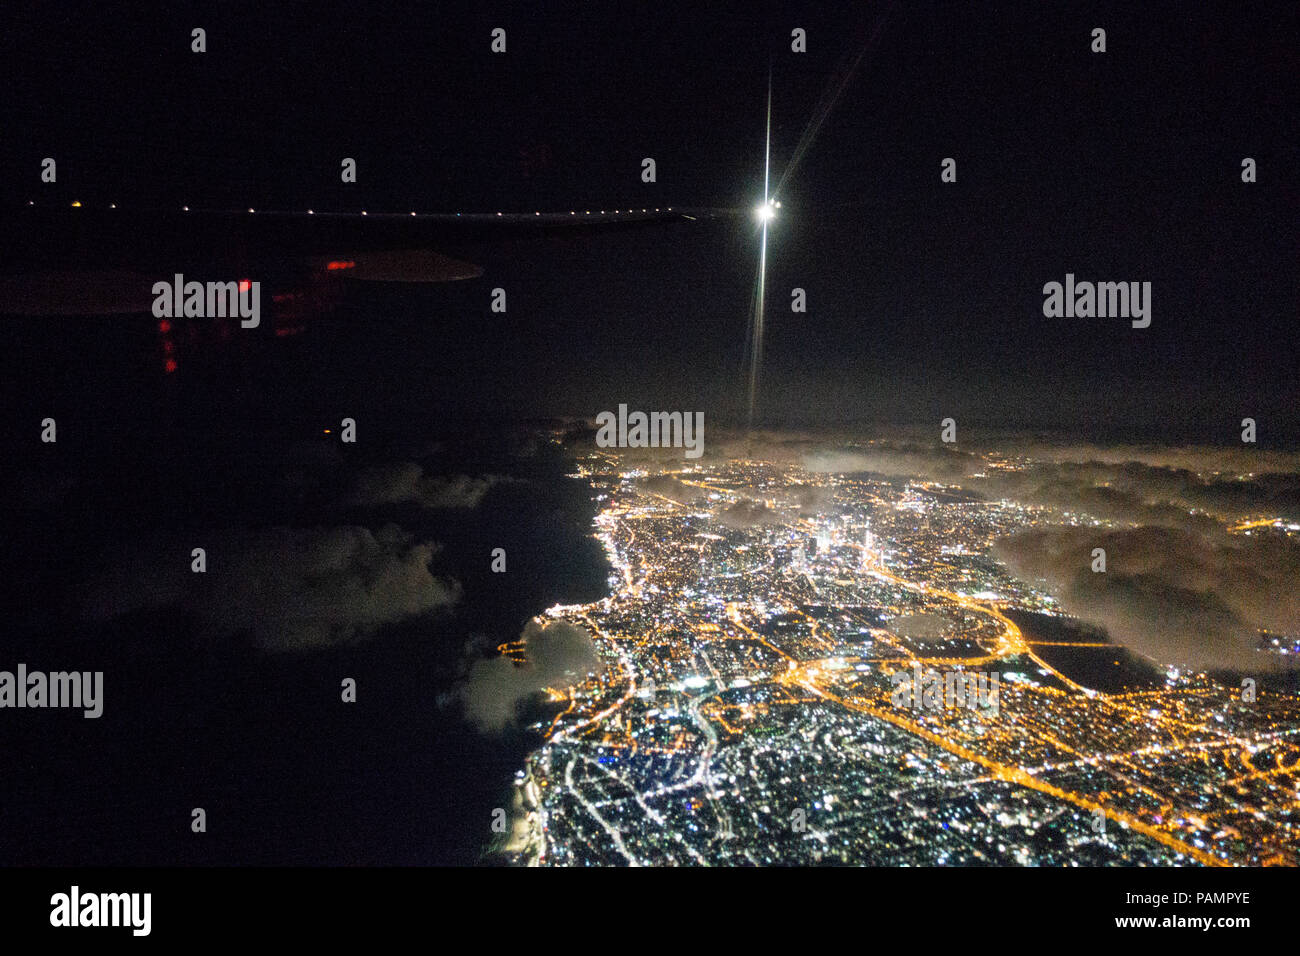 Tel Aviv as seen from an aircraft window departing at night Stock Photo